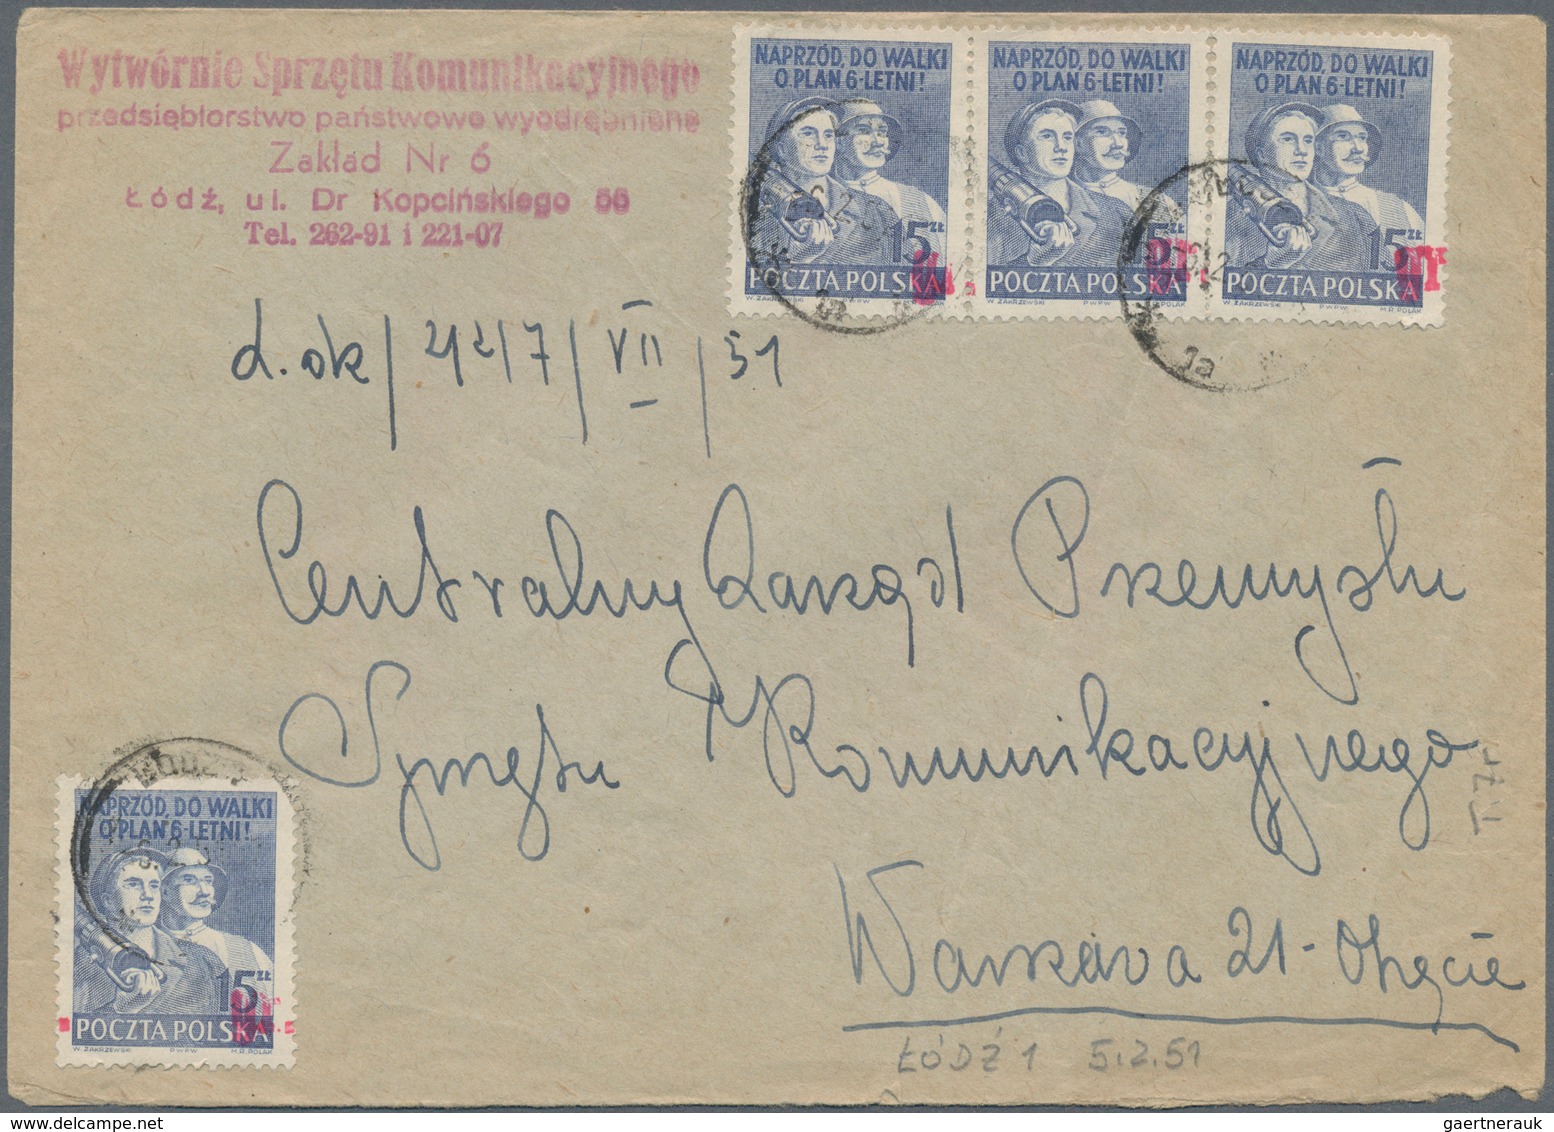 Polen: 1950/1951, Groszy-Overprints, collection of more than 290 covers and many used stamps and pie